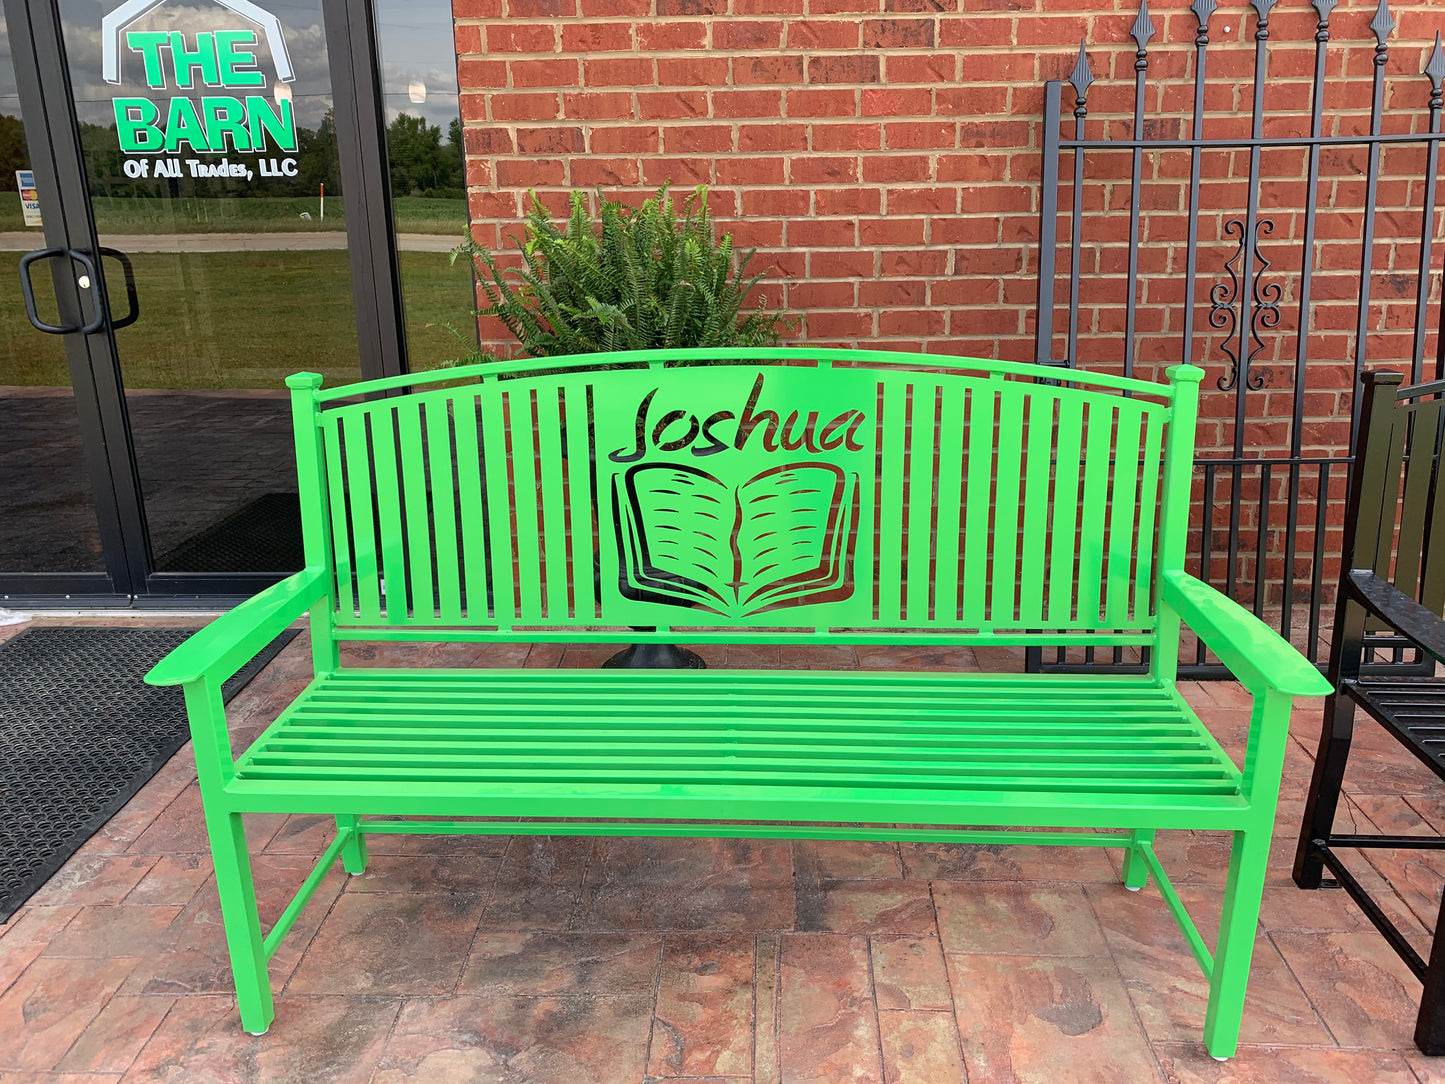 Custom Metal Bench Powder Coated Your color choice- Your design choice in back of bench.